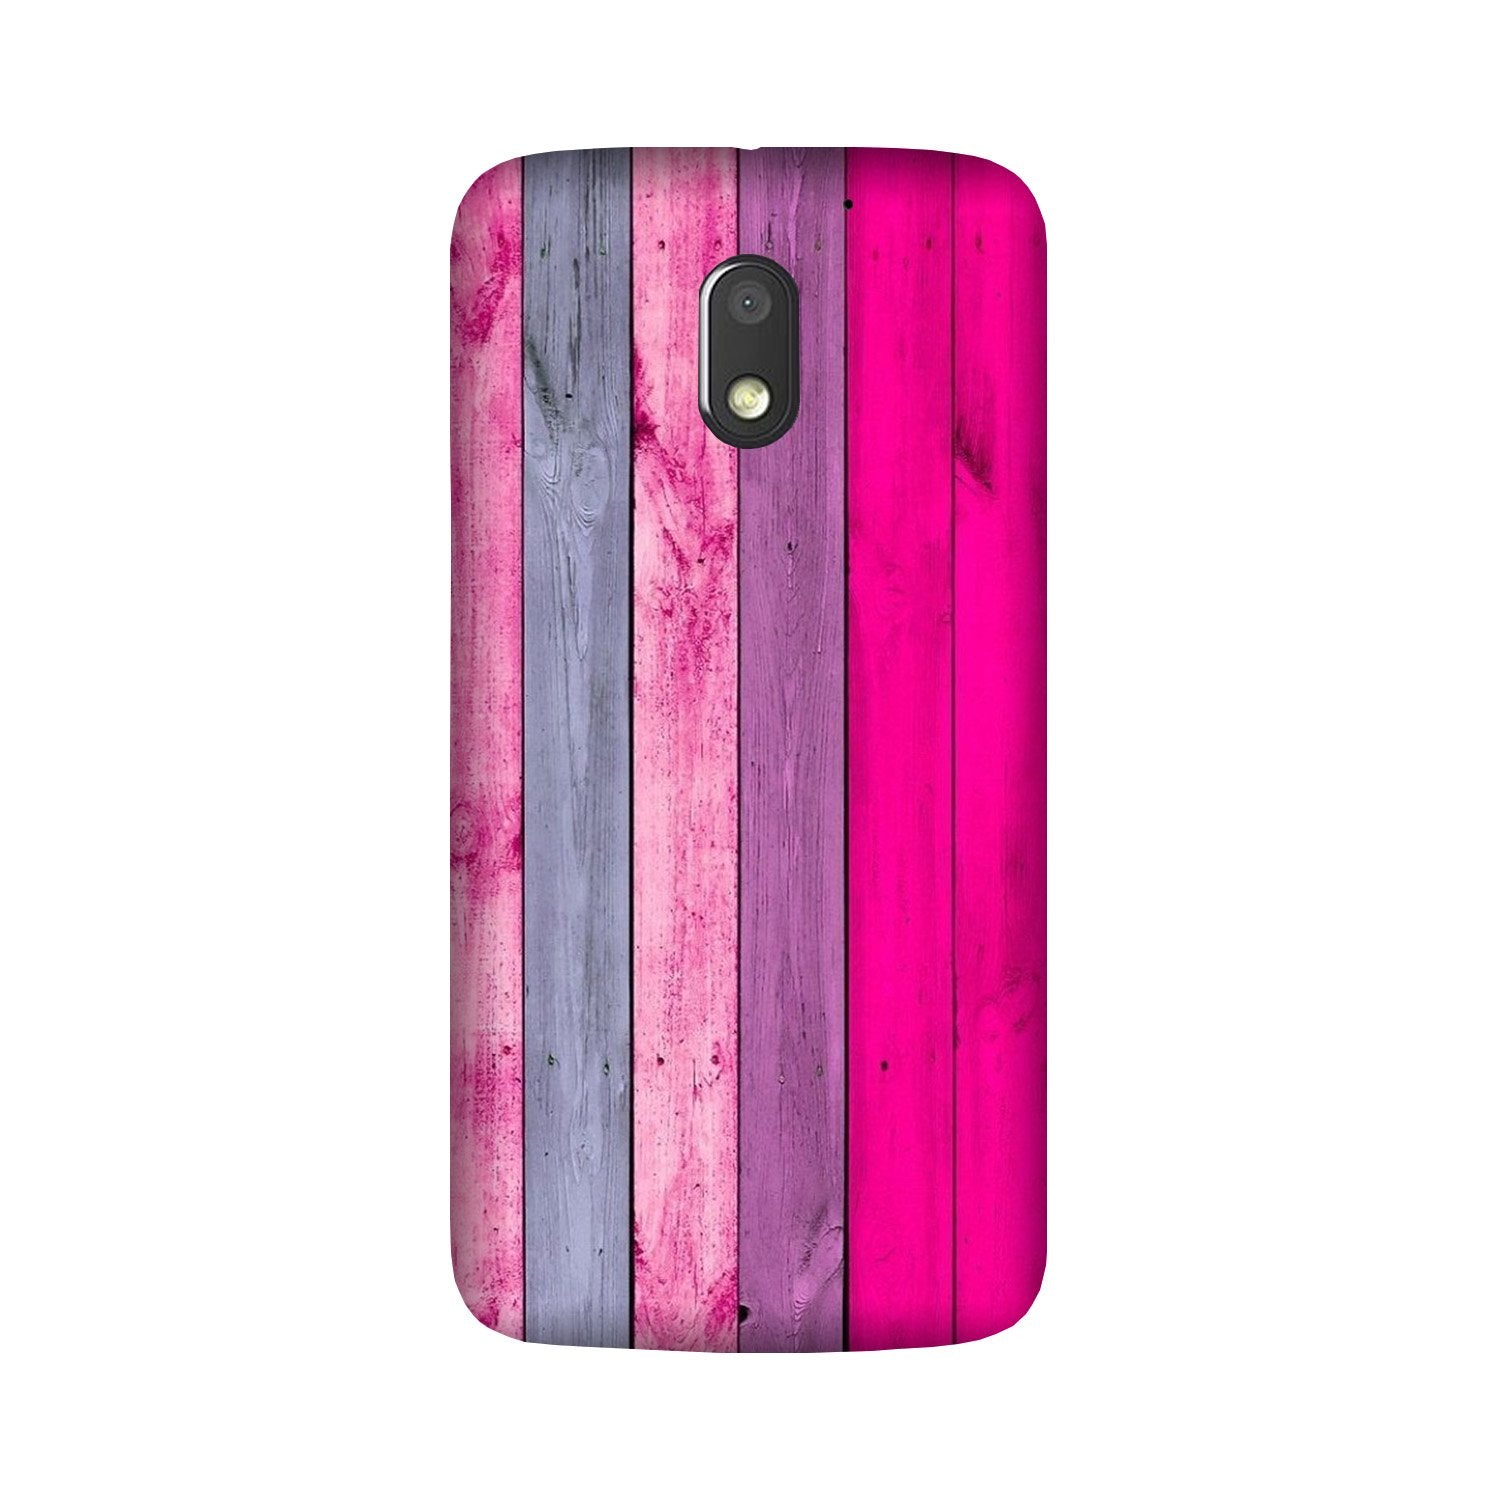 Wooden look Case for Moto G4 Play